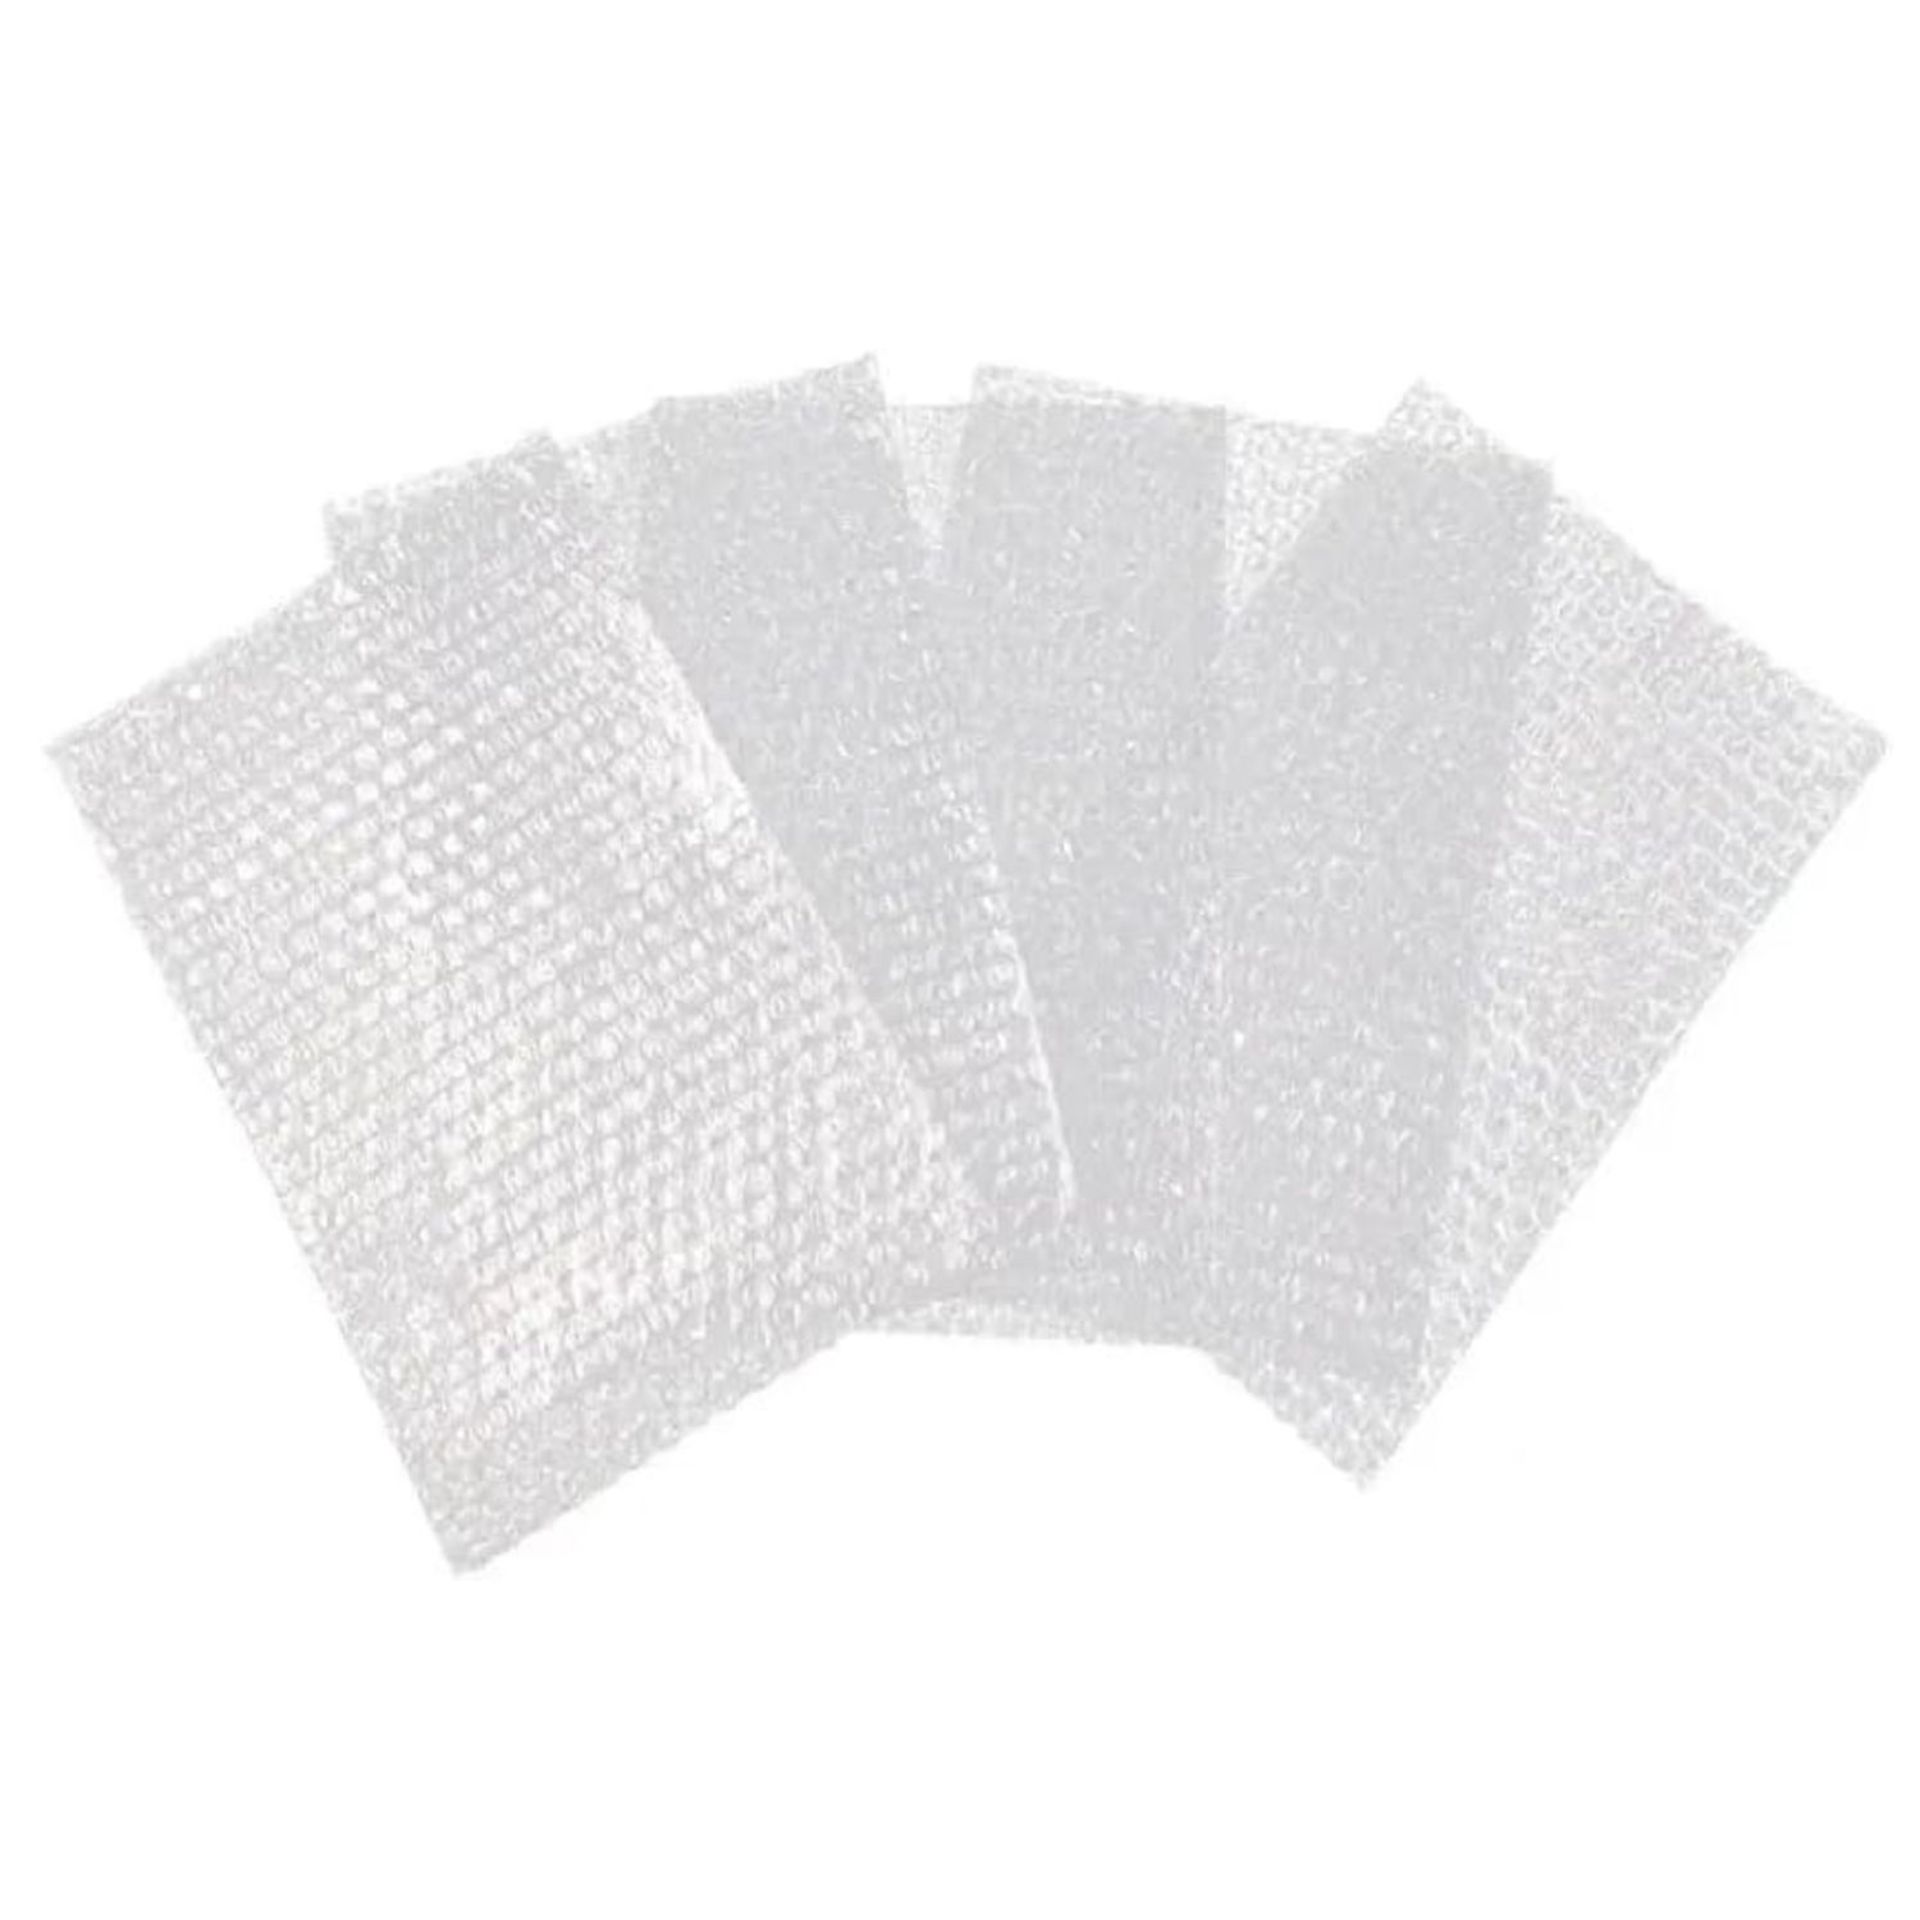 10 BOXES OF 100 PEEL AND SEAL BUBBLE WRAP PREMIUM CLEAR POUCH BAGS, 100X135MM - Bild 2 aus 4